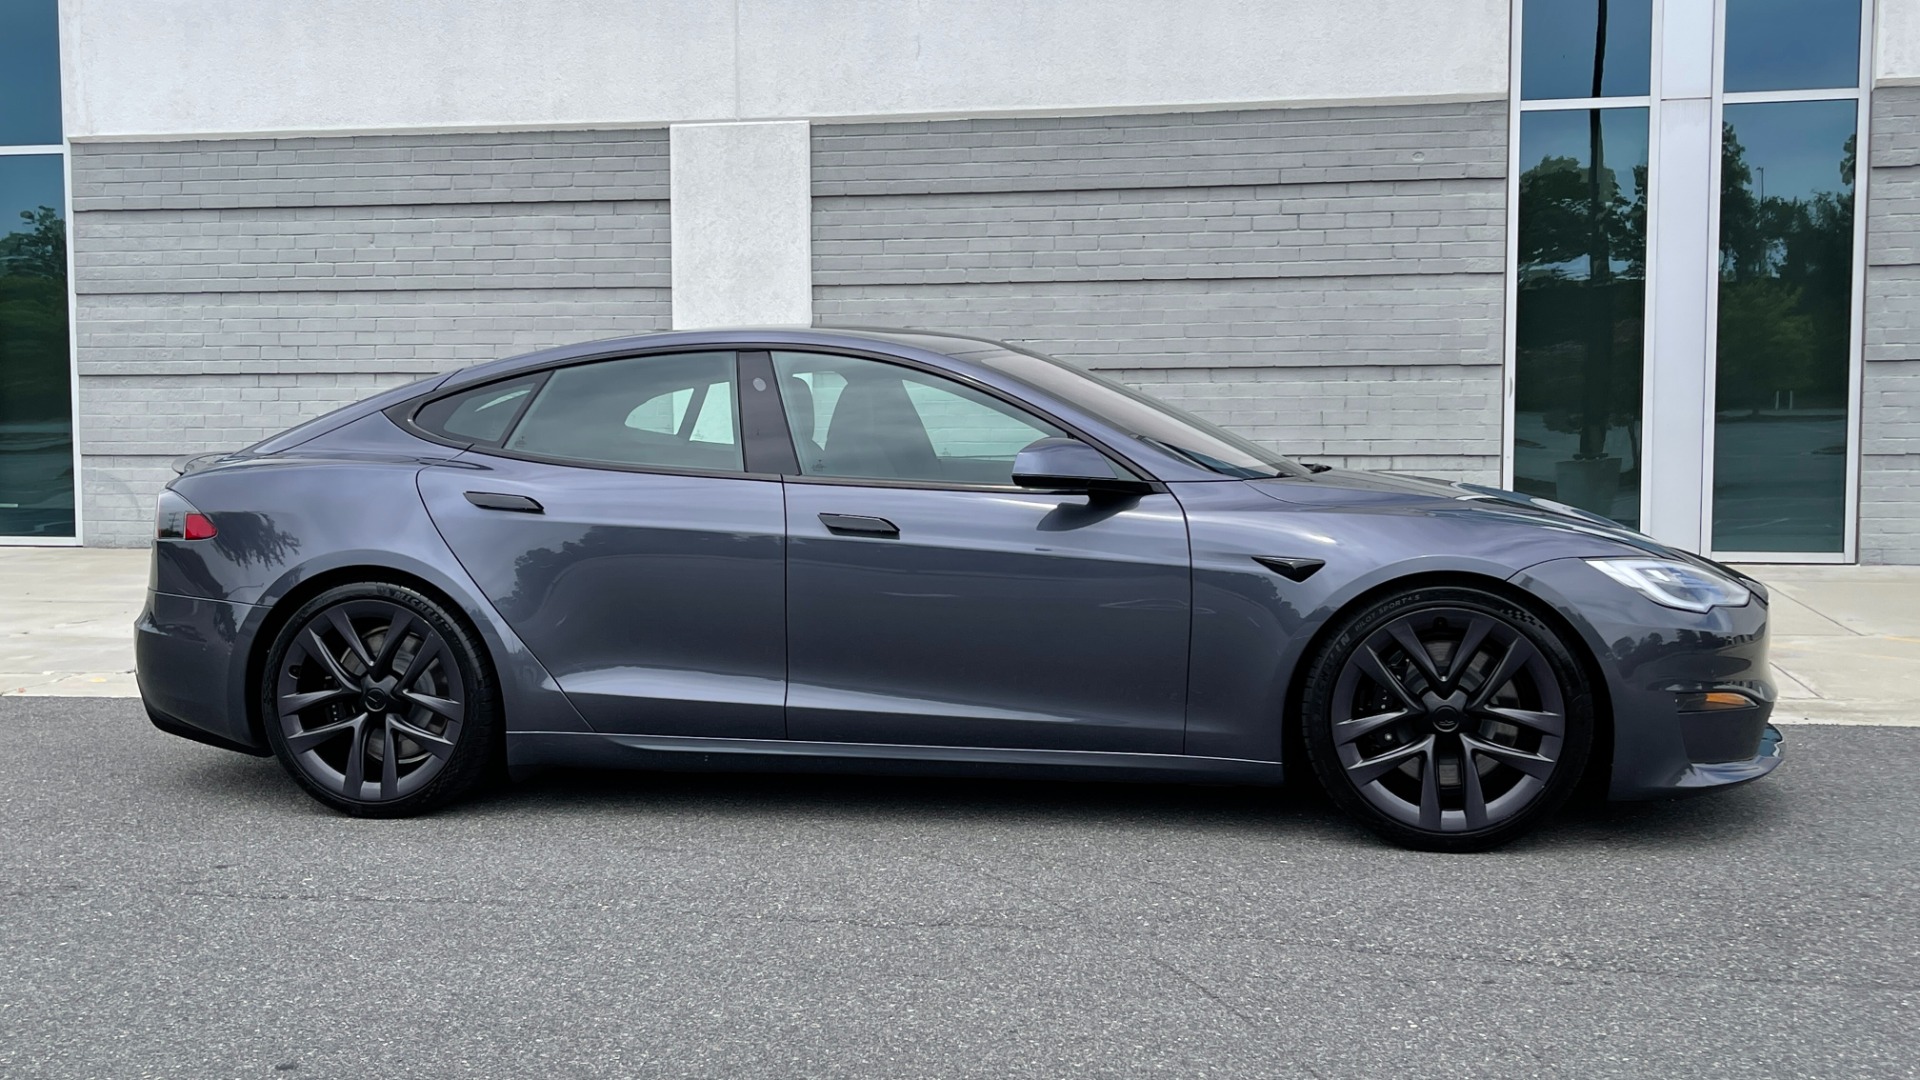 Used 2021 Tesla Model S Plaid / FULL SELF DRIVING / 21IN WHEELS / CARBON FIBER TRIM / PREMIUM CONNE for sale $105,000 at Formula Imports in Charlotte NC 28227 8